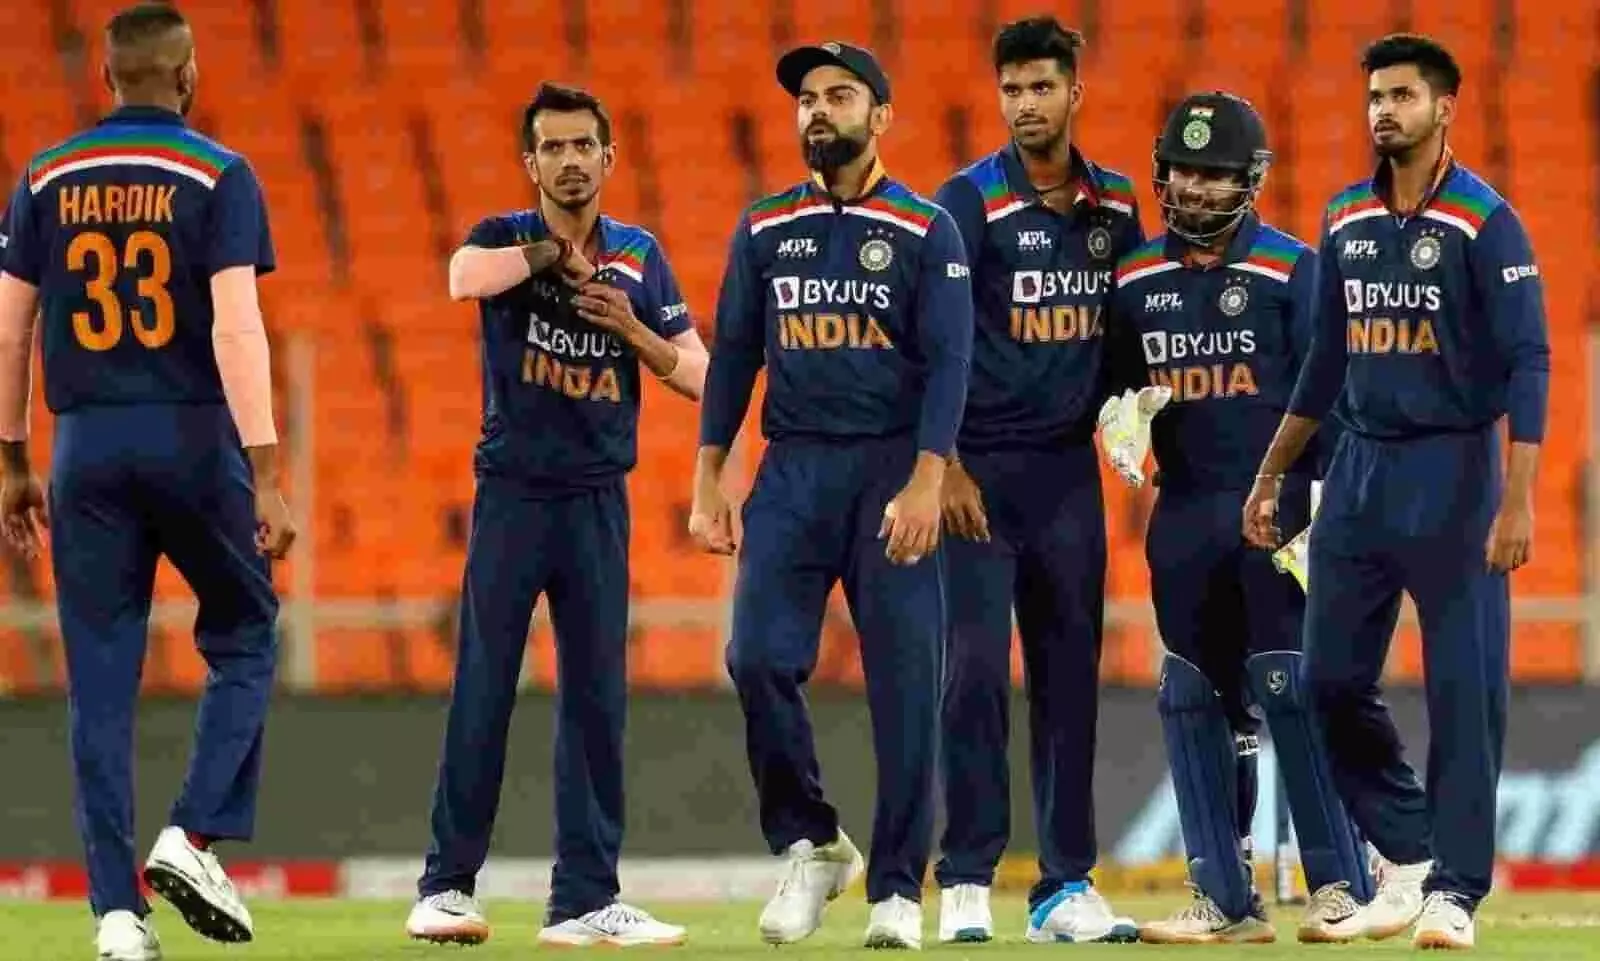 T20 Cricket World Cup: India to play second practice match against Australia tomorrow